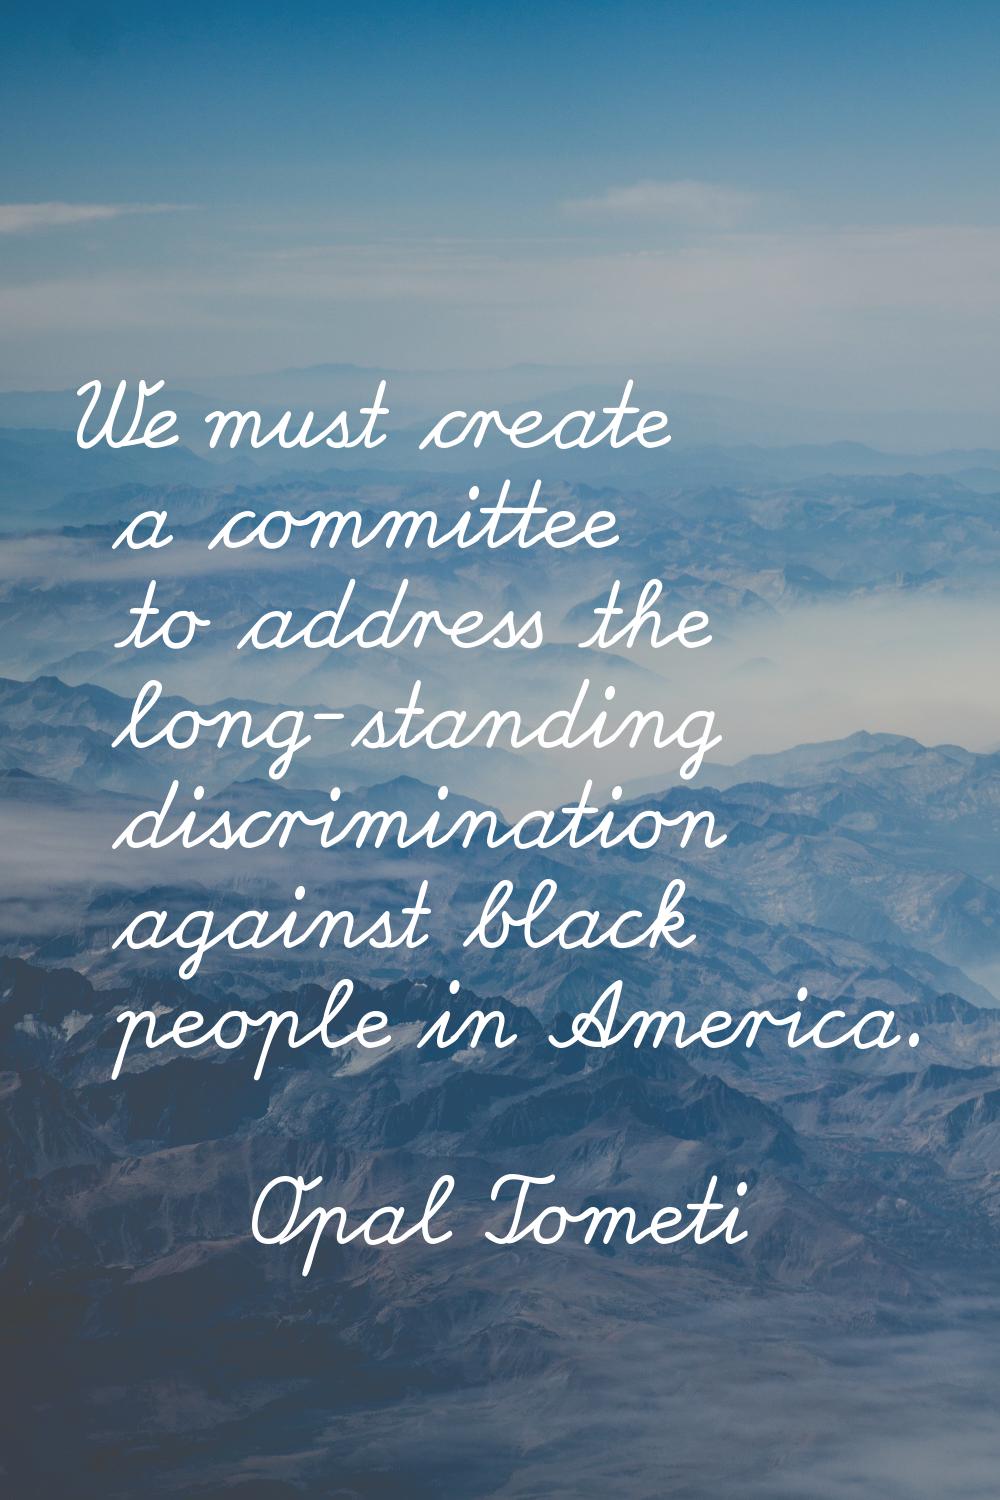 We must create a committee to address the long-standing discrimination against black people in Amer